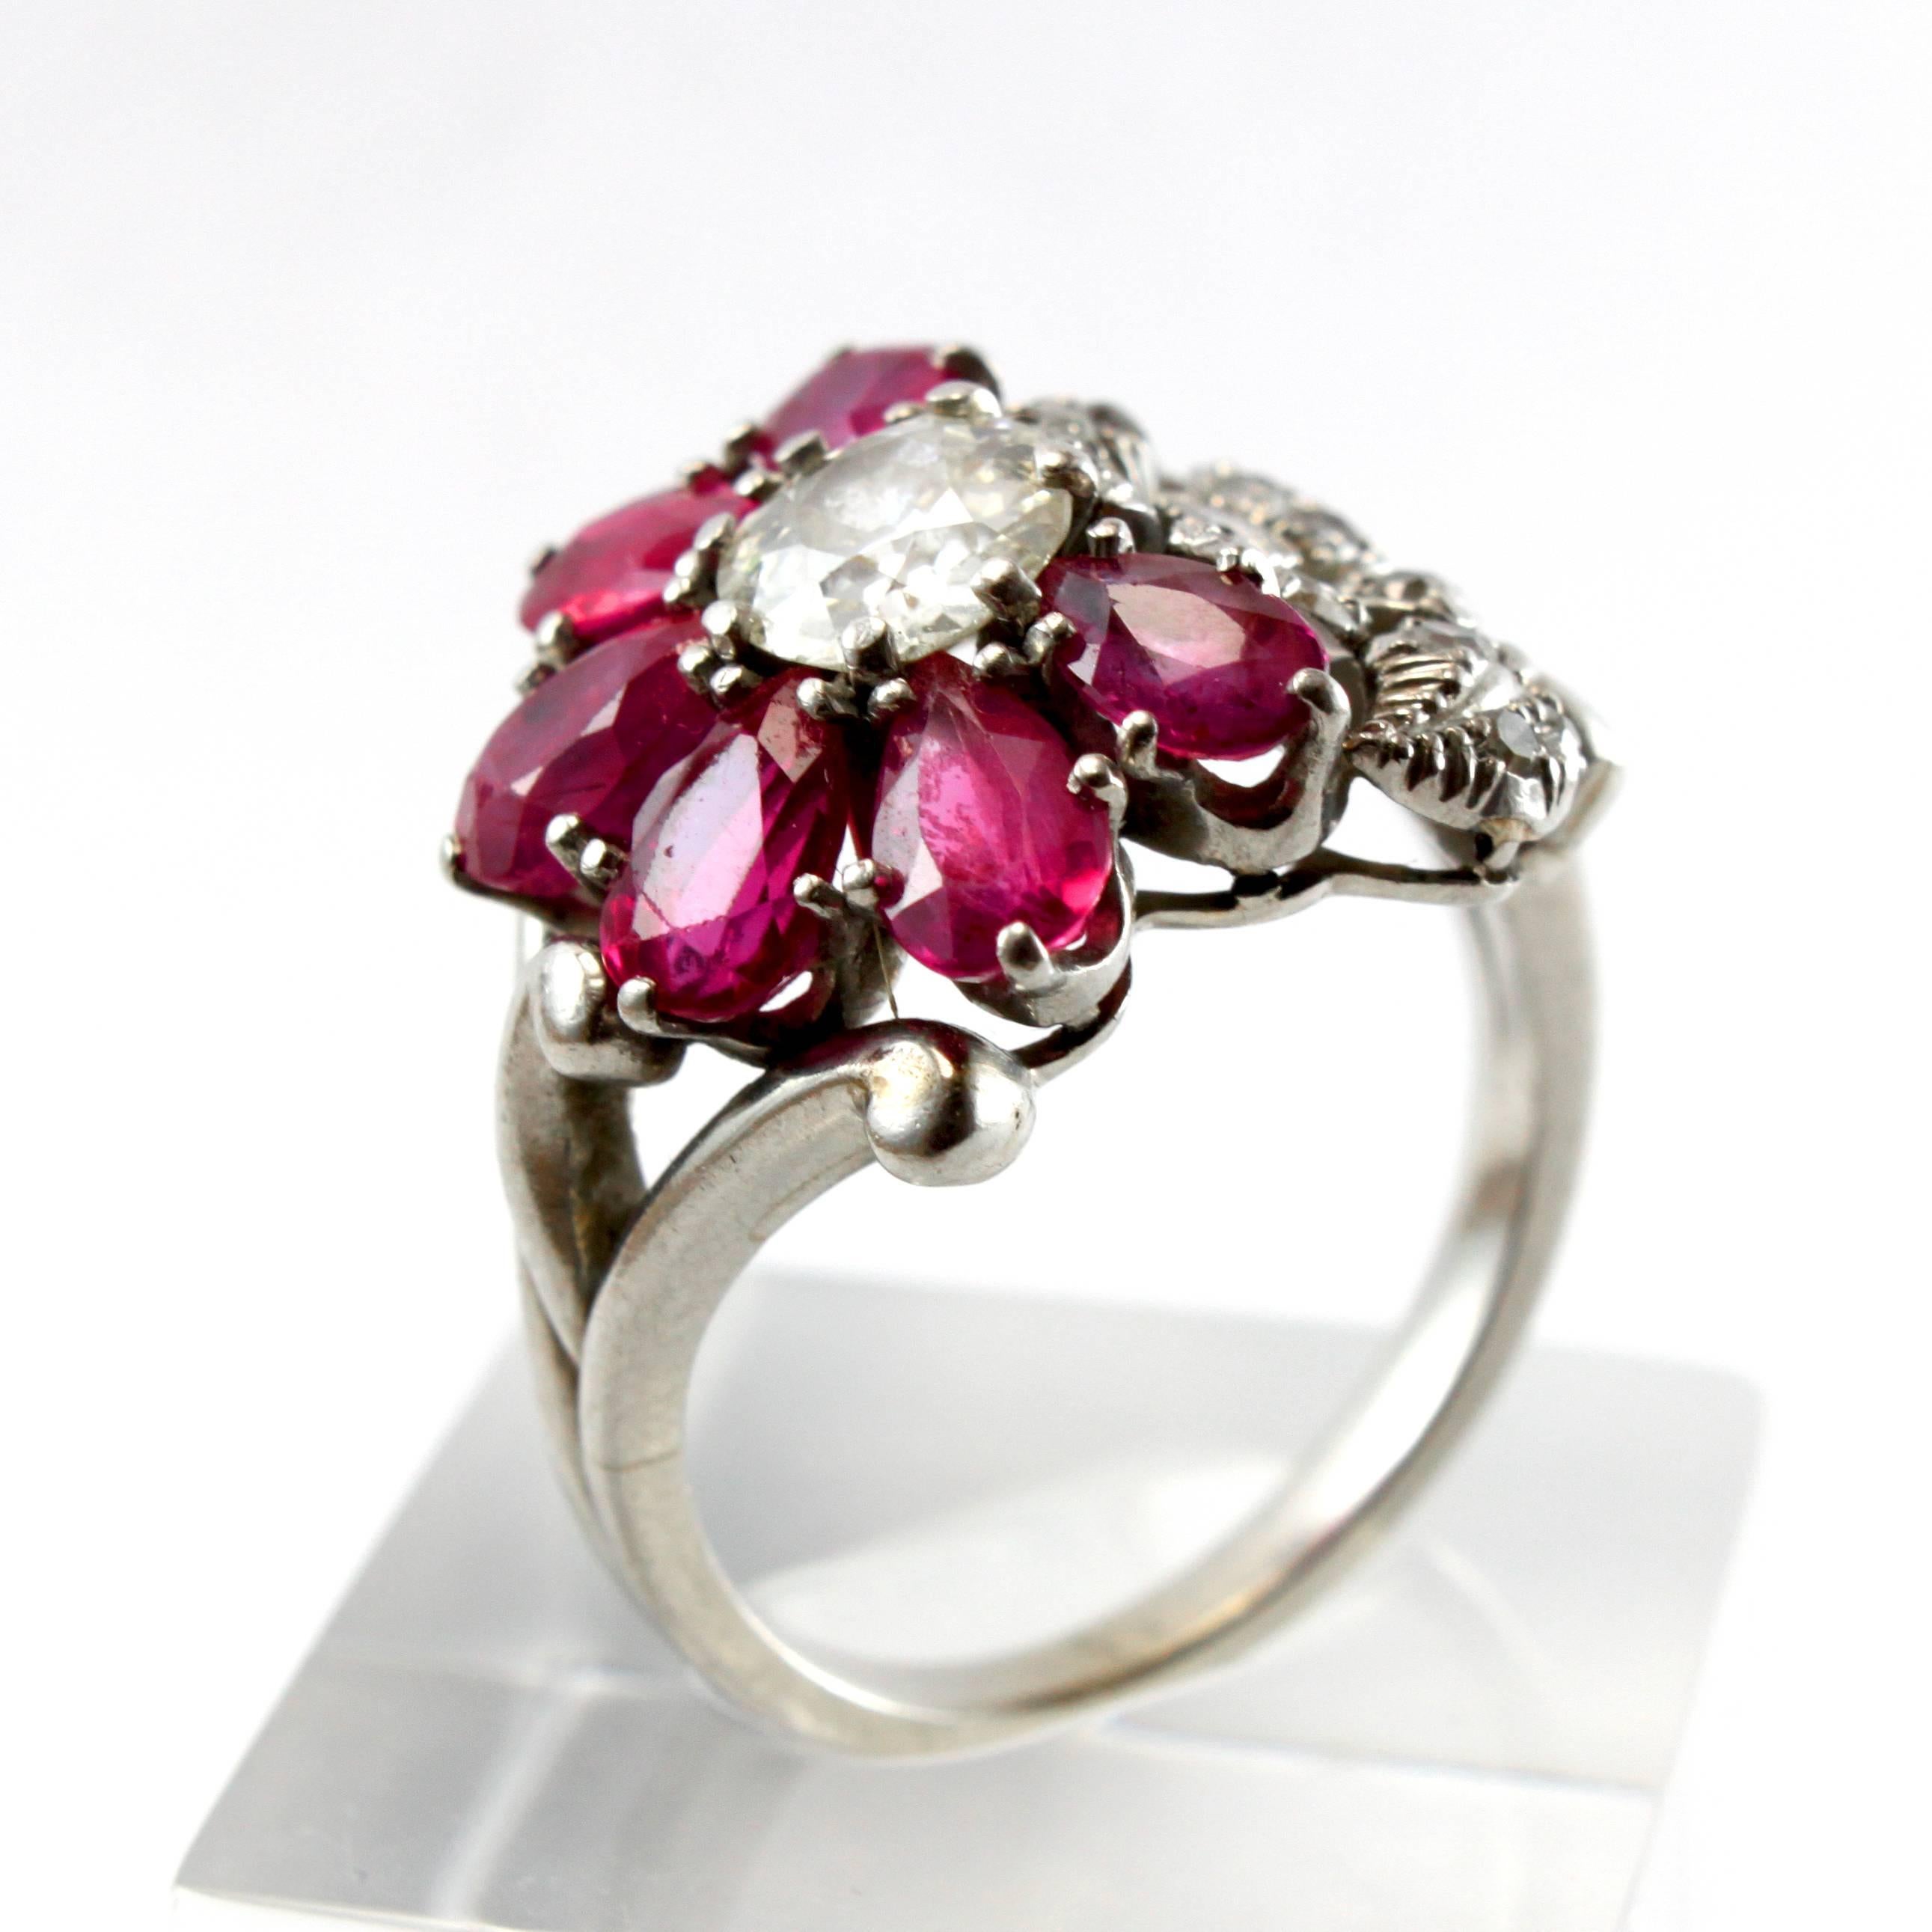 An unusual Ruby and Diamond Cluster Ring, ca. 1940s.

Centring an old-cut diamond of ca. 0.85ct (ca. I/VS1), surrounded by six ruby petals, accentuated by another flower studded with diamonds.

Ring size 8 (can be altered).